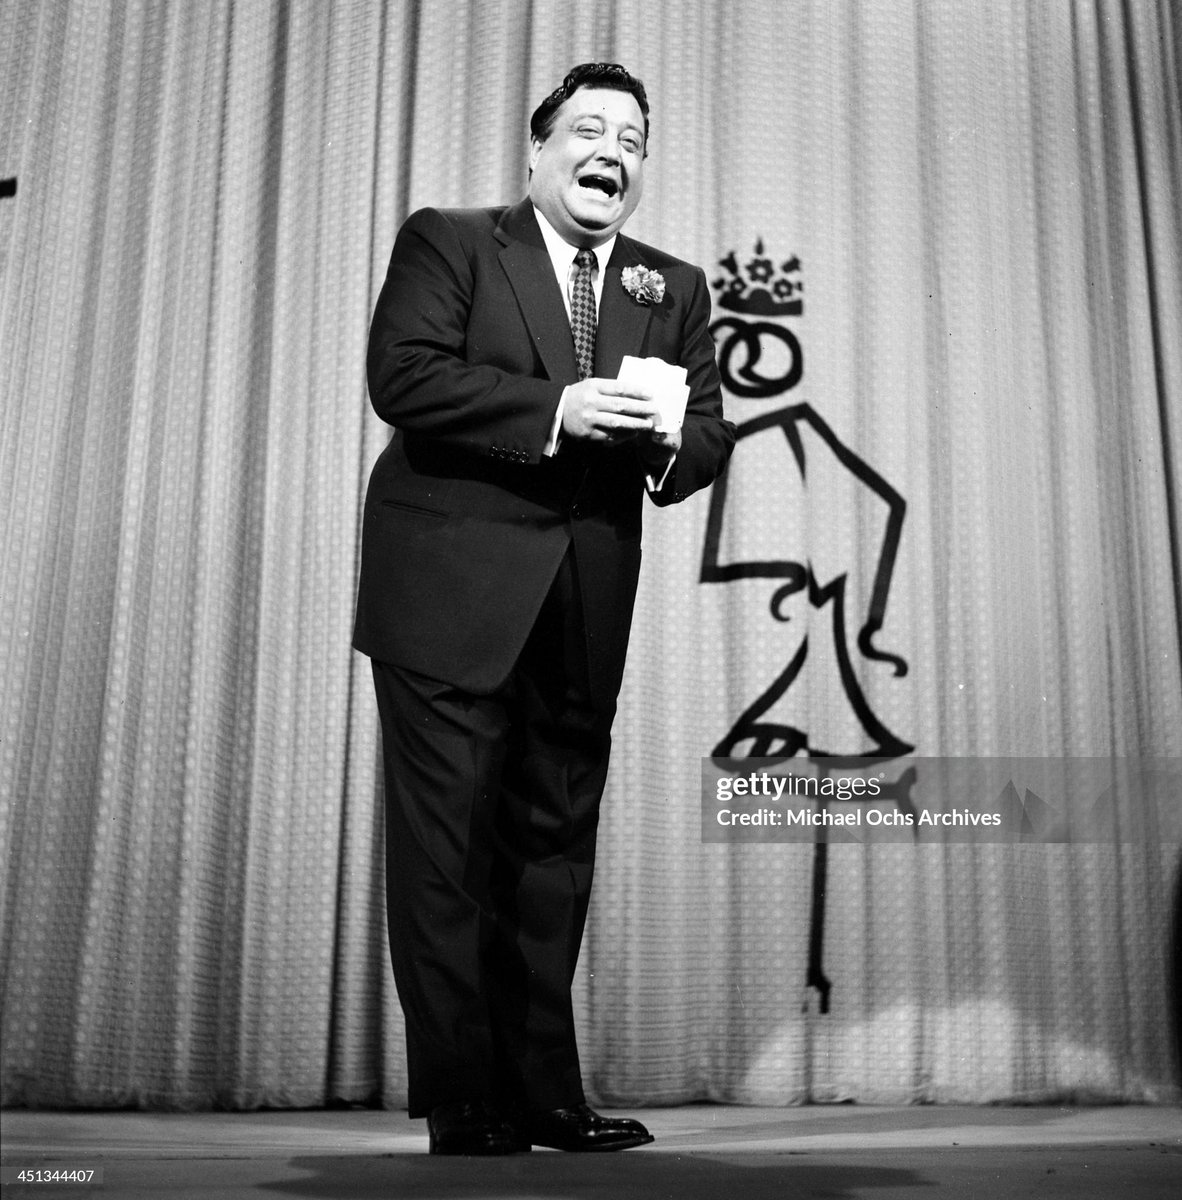 It's a mistake to think that wearing slim-fit clothes makes you look slimmer. Or that everyone has to conform to some trend. A better approach is to dress for your body type. Look at the relationship between Jackie Gleason's jacket and pants.